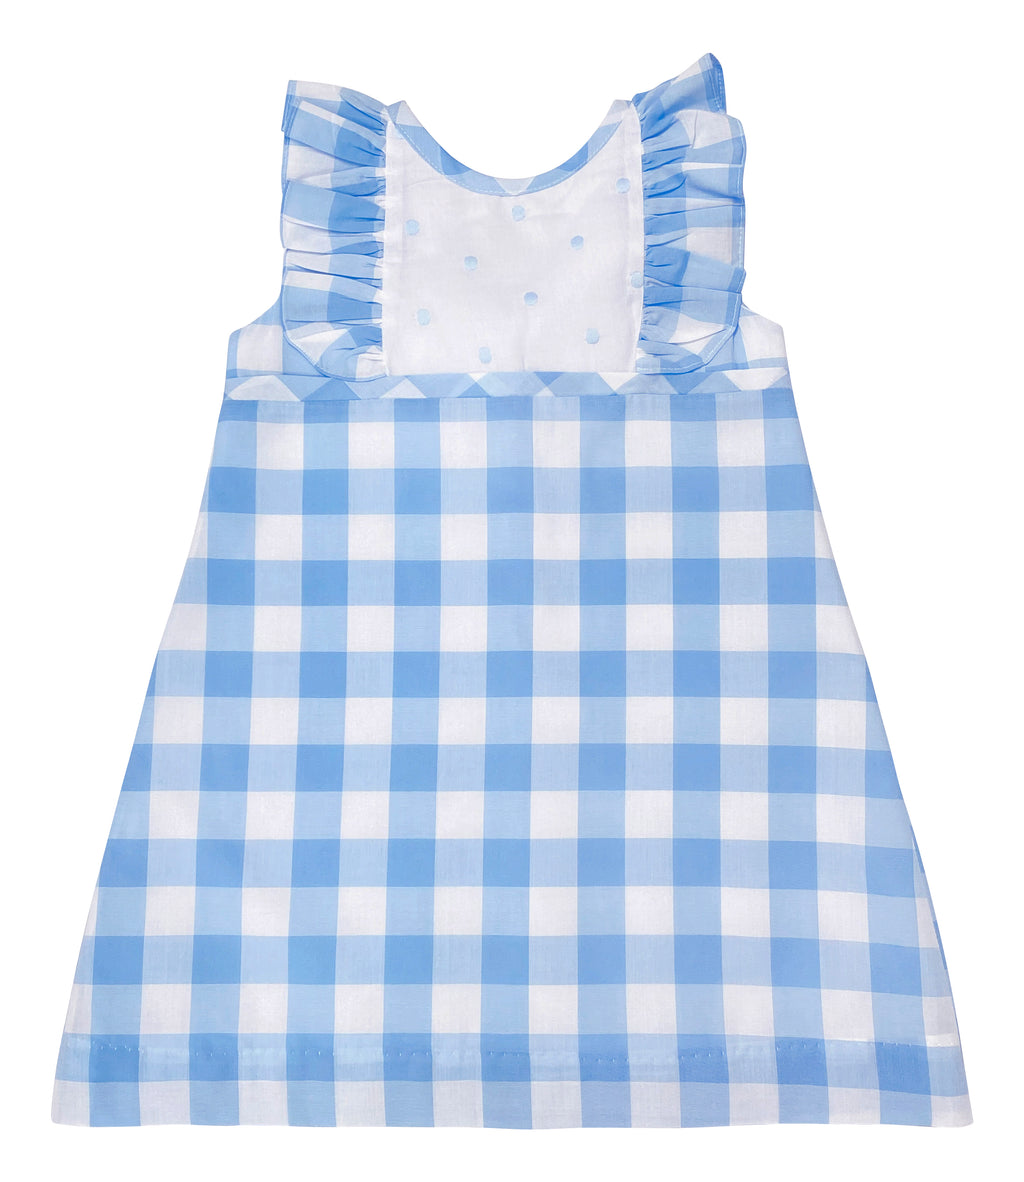 Blue checks and Dots A line girl's dress - Little Threads Inc. Children's Clothing